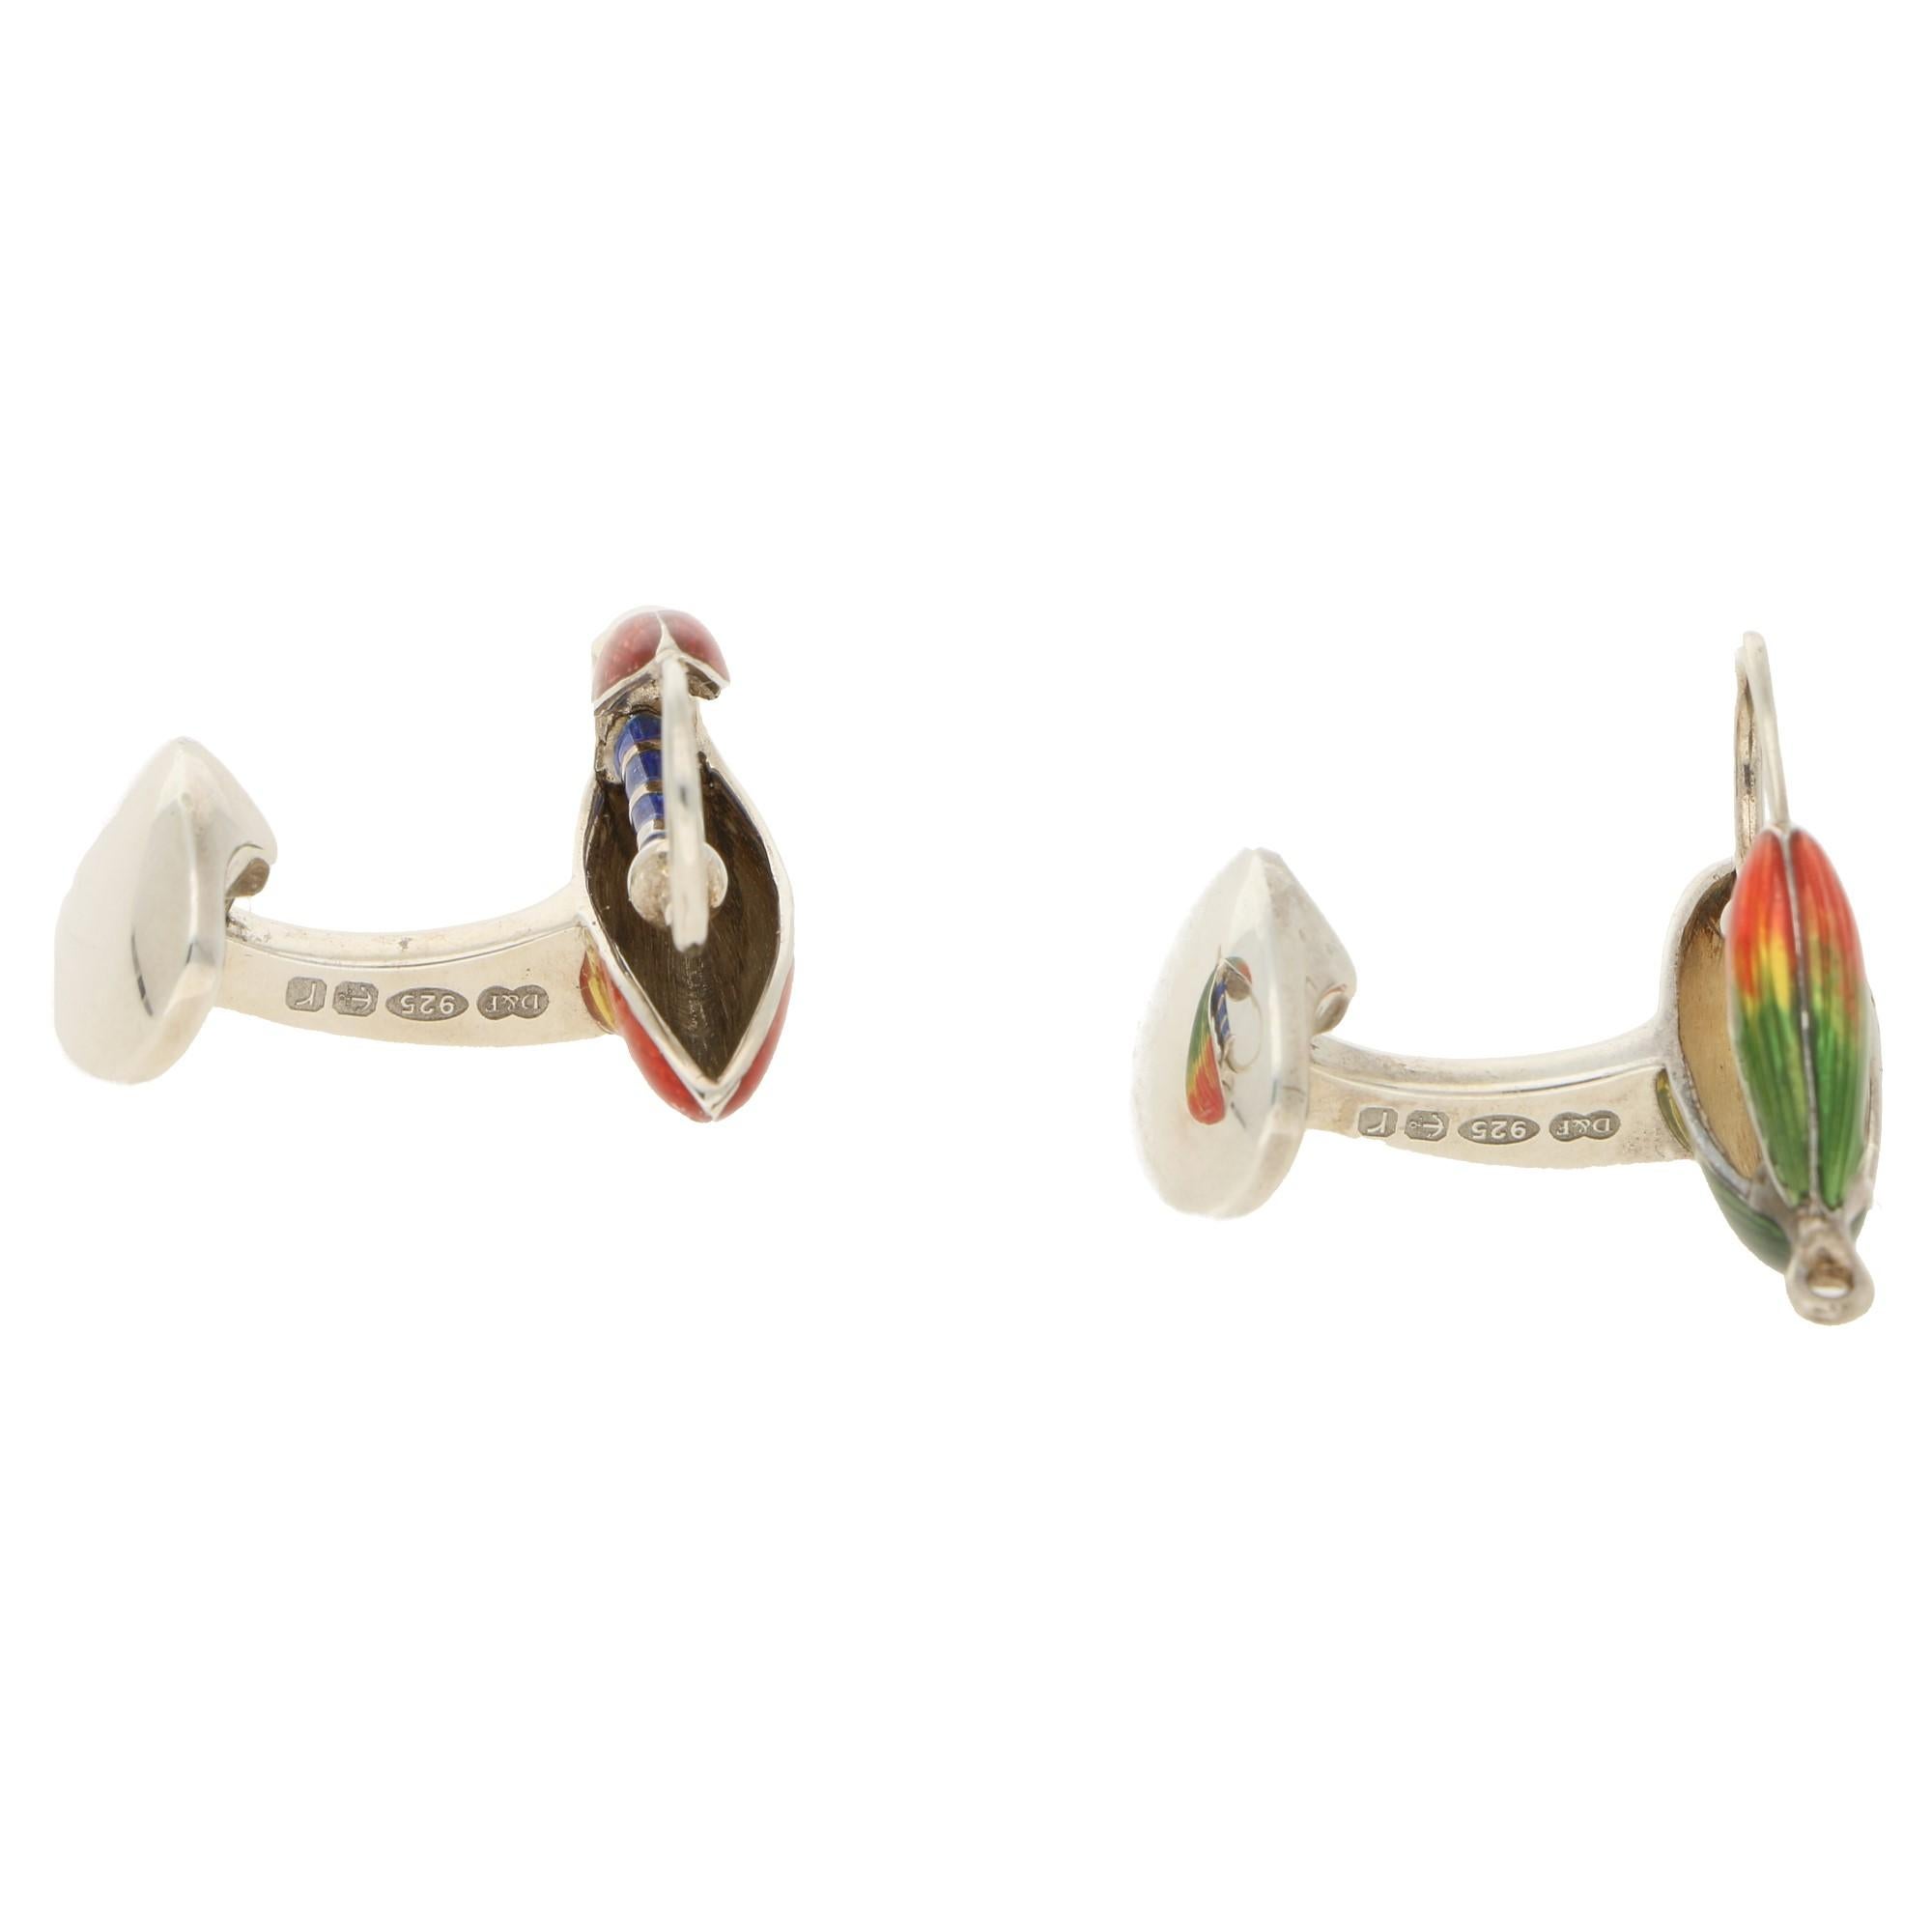 A fine pair of fly fishing cufflinks in silver with vibrant enamel work. With a domed oval spring link fitting, carrying full hallmarks.